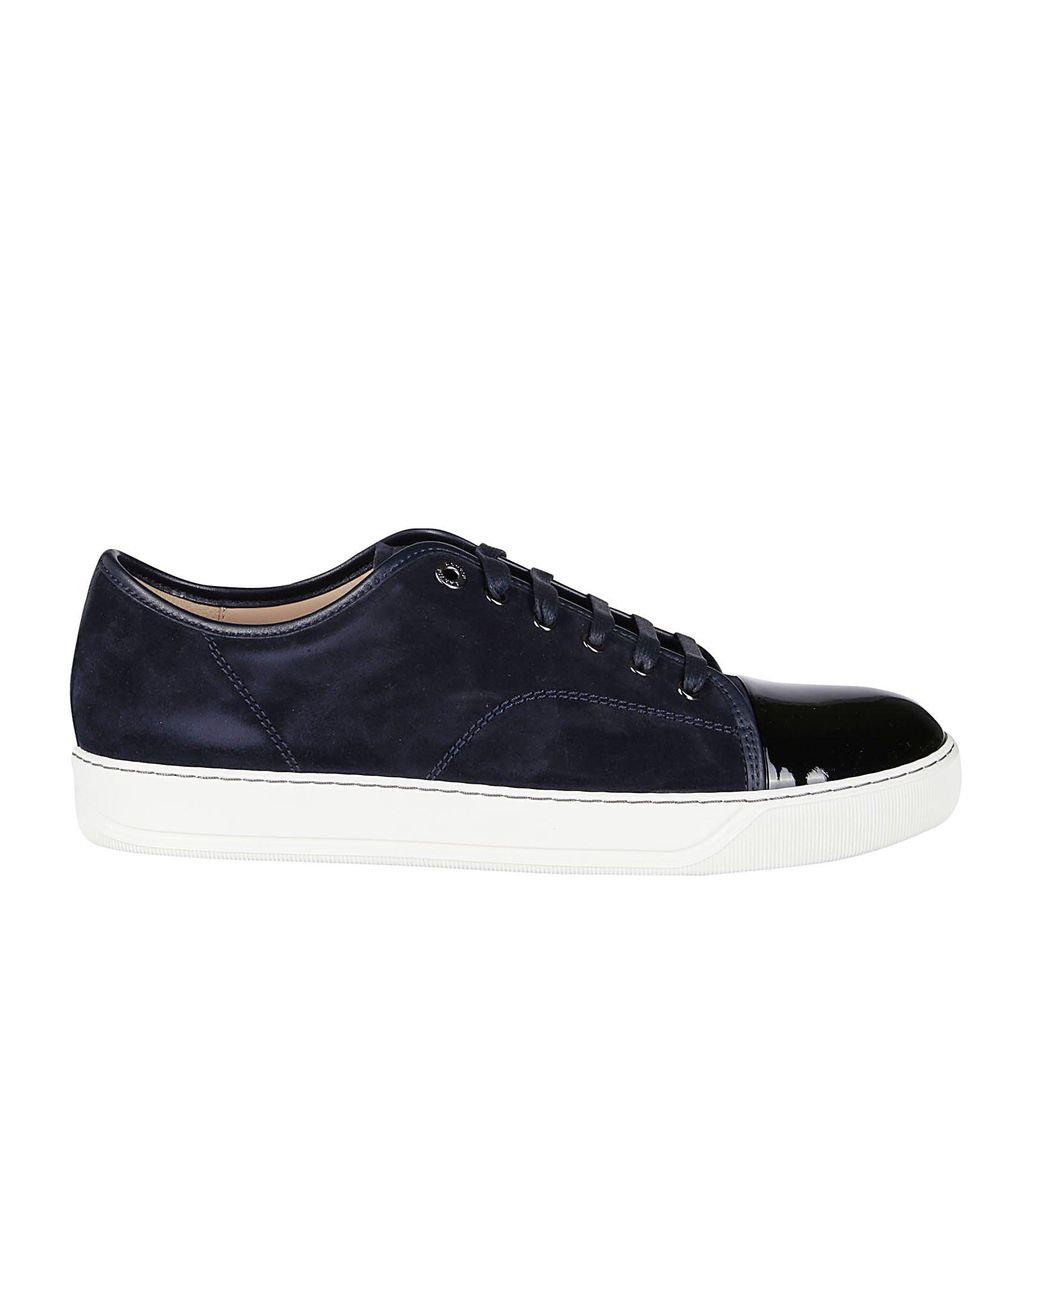 Lanvin Leather Lace-up Sneakers in Blue for Men - Lyst